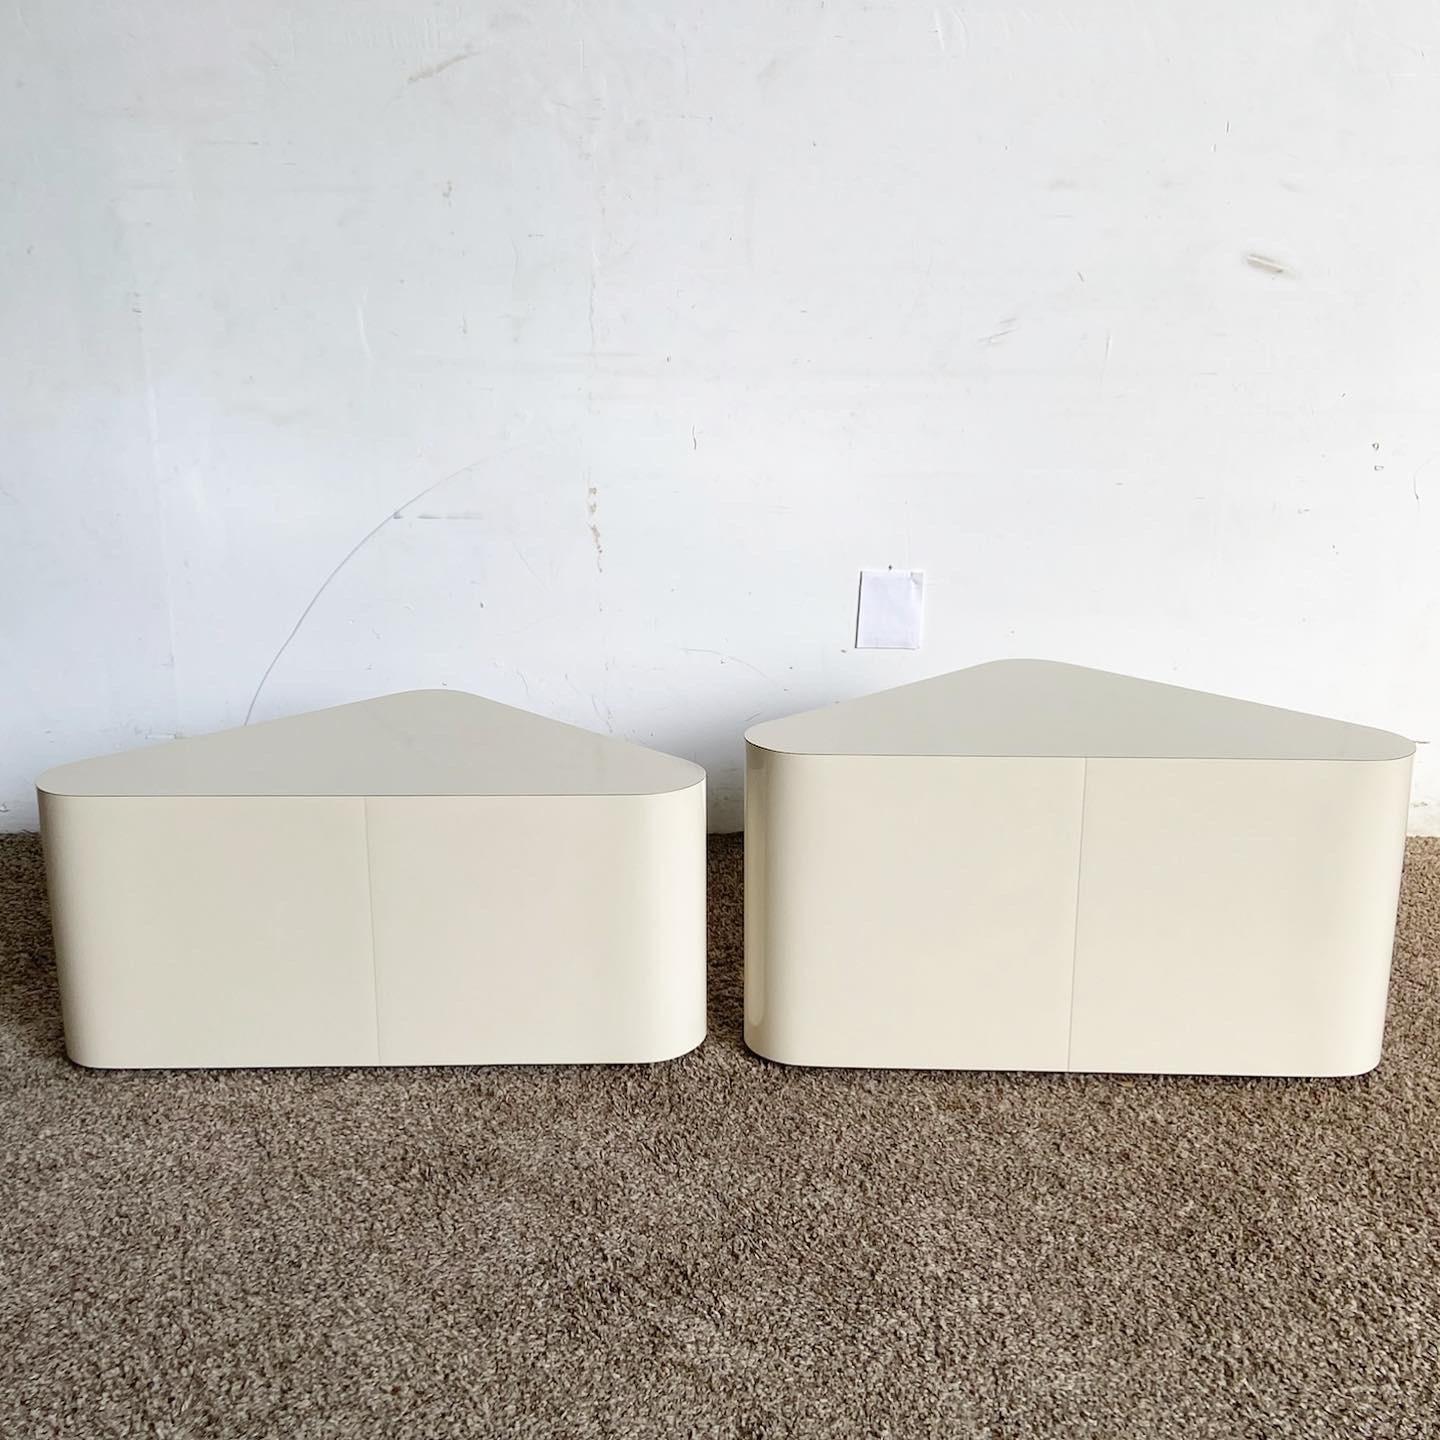 American Postmodern Cream Lacquer Laminate Triangular Nesting Side Tables For Sale